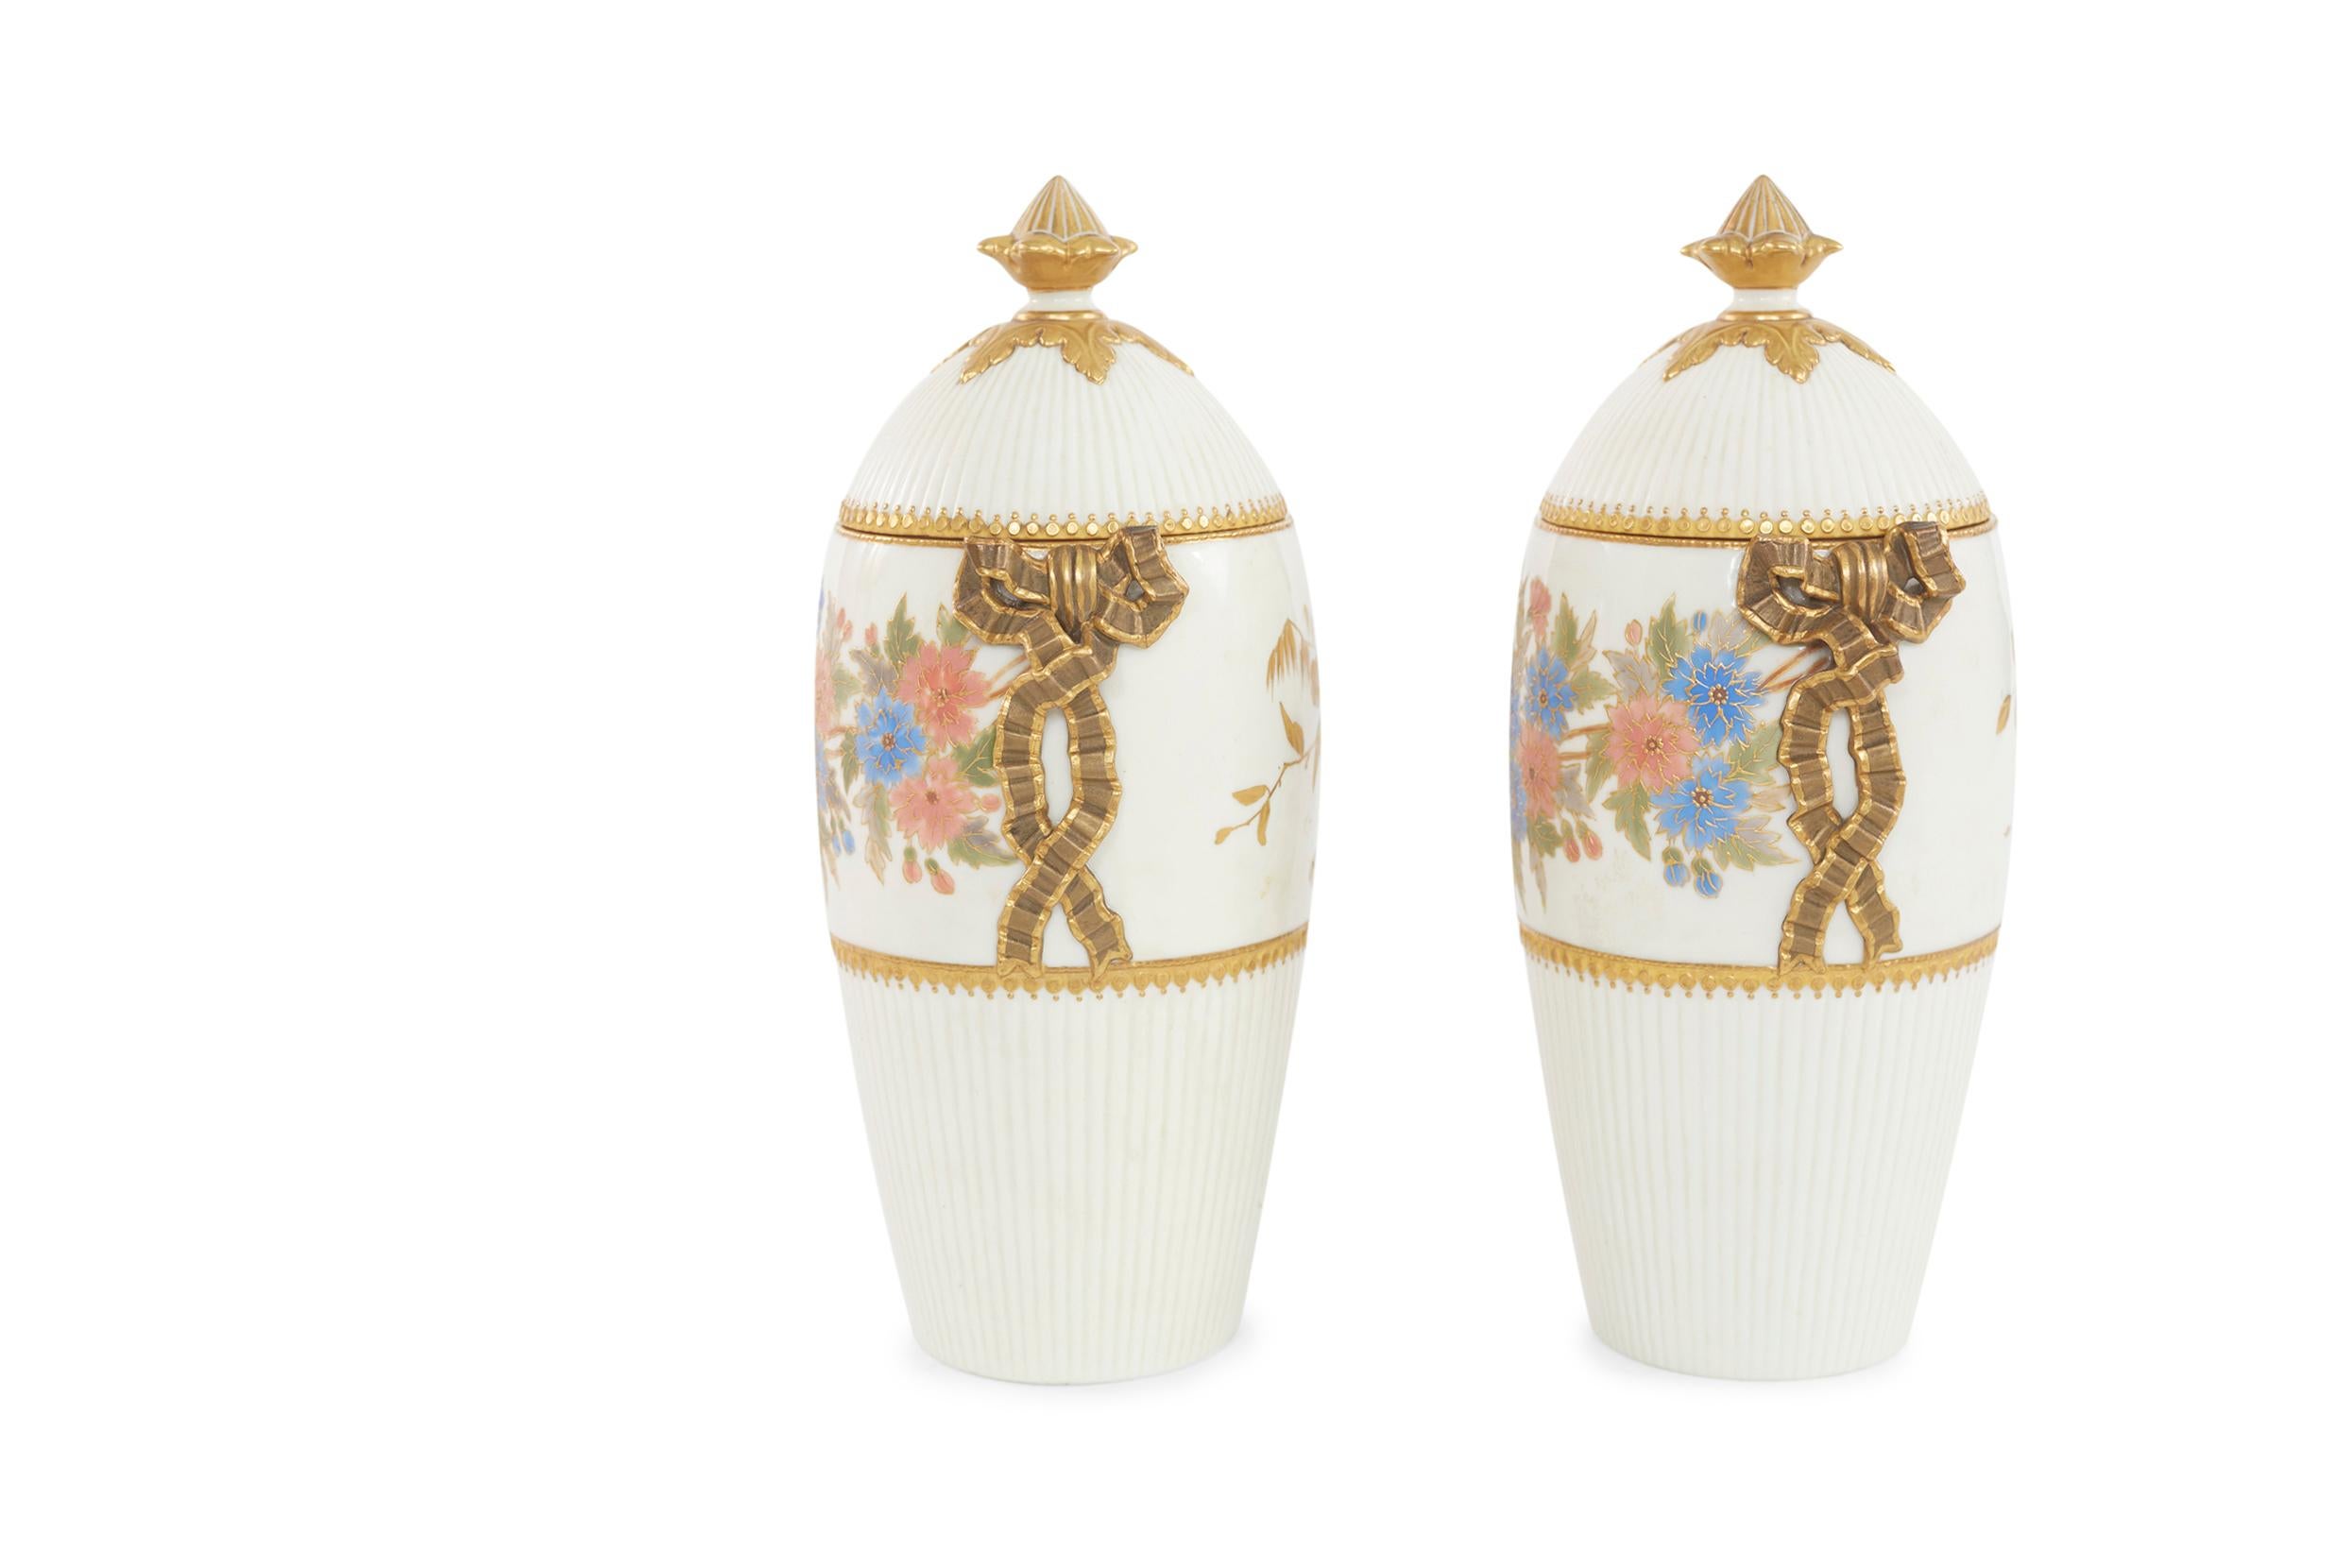 European Mid 19th Century Pair Covered Porcelain Urns For Sale